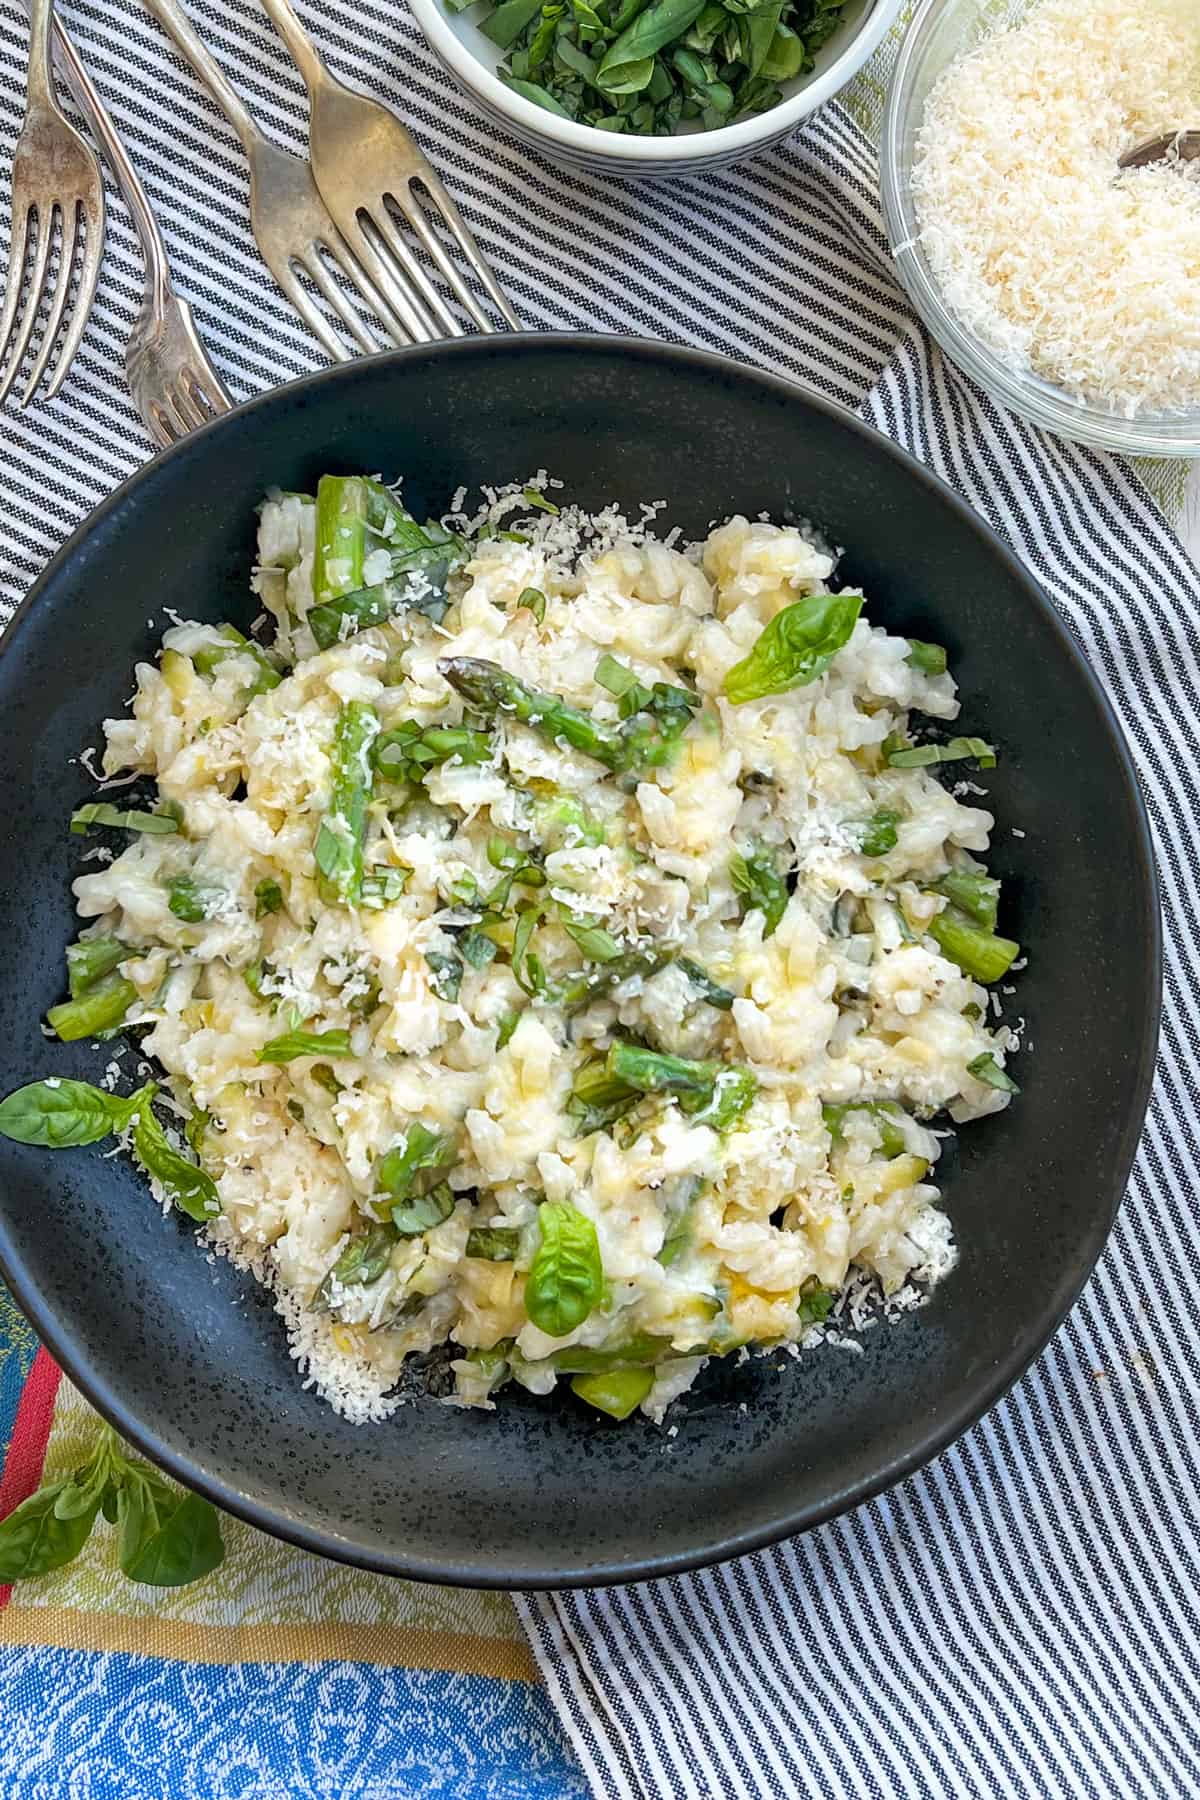 bowl of creamy risotto with asparagus, lemon zest, basil and parmesan cheese